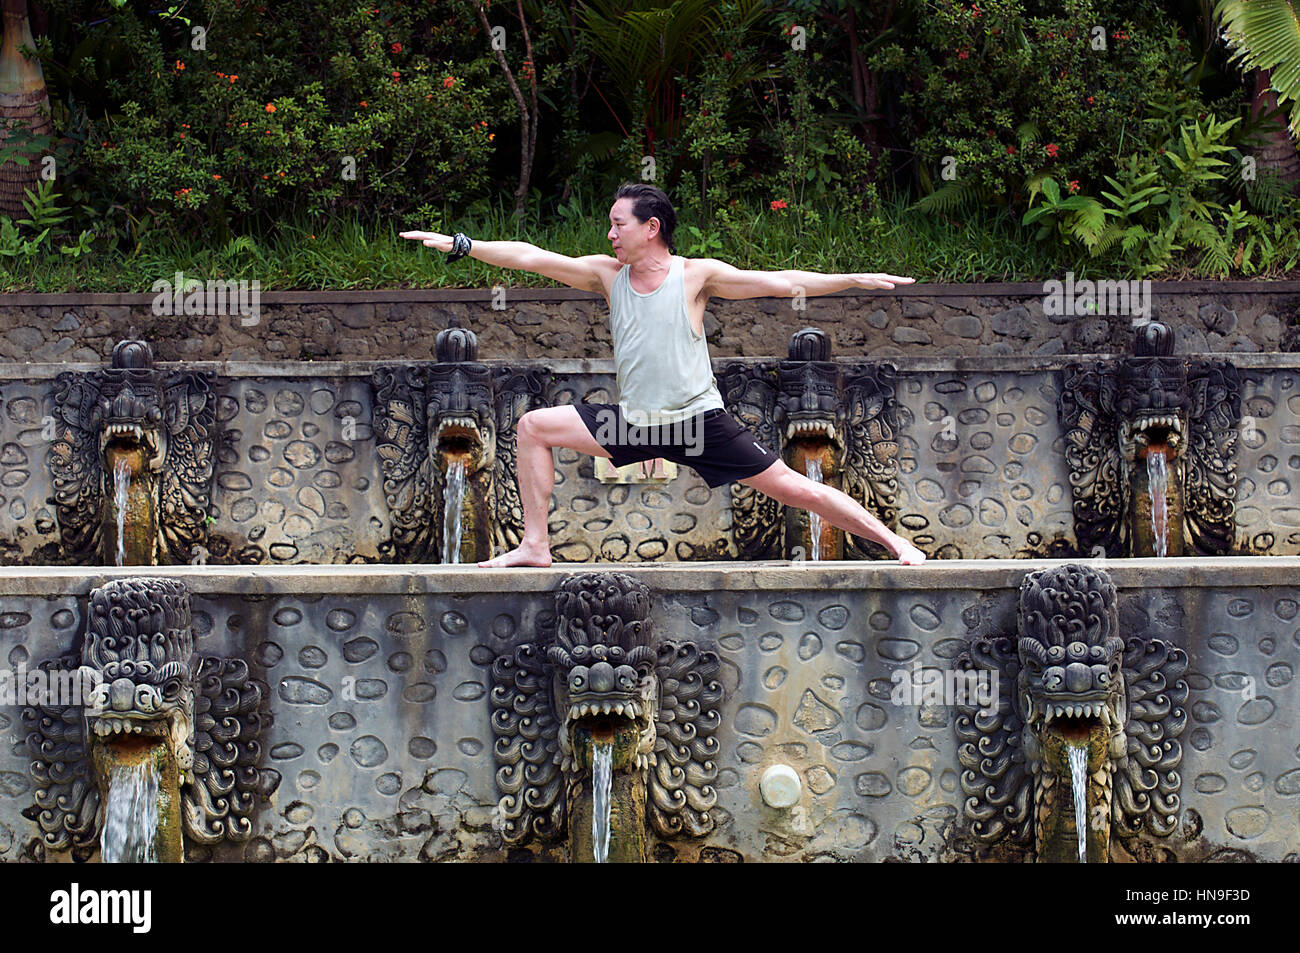 Middle-Aged Asian Man Holds a Hatha Warrior Yoga Pose at Banjar Hot Springs Pools in Bali, Indonesia as Water Pours from Dragon-Like Creatures' Mouths Stock Photo